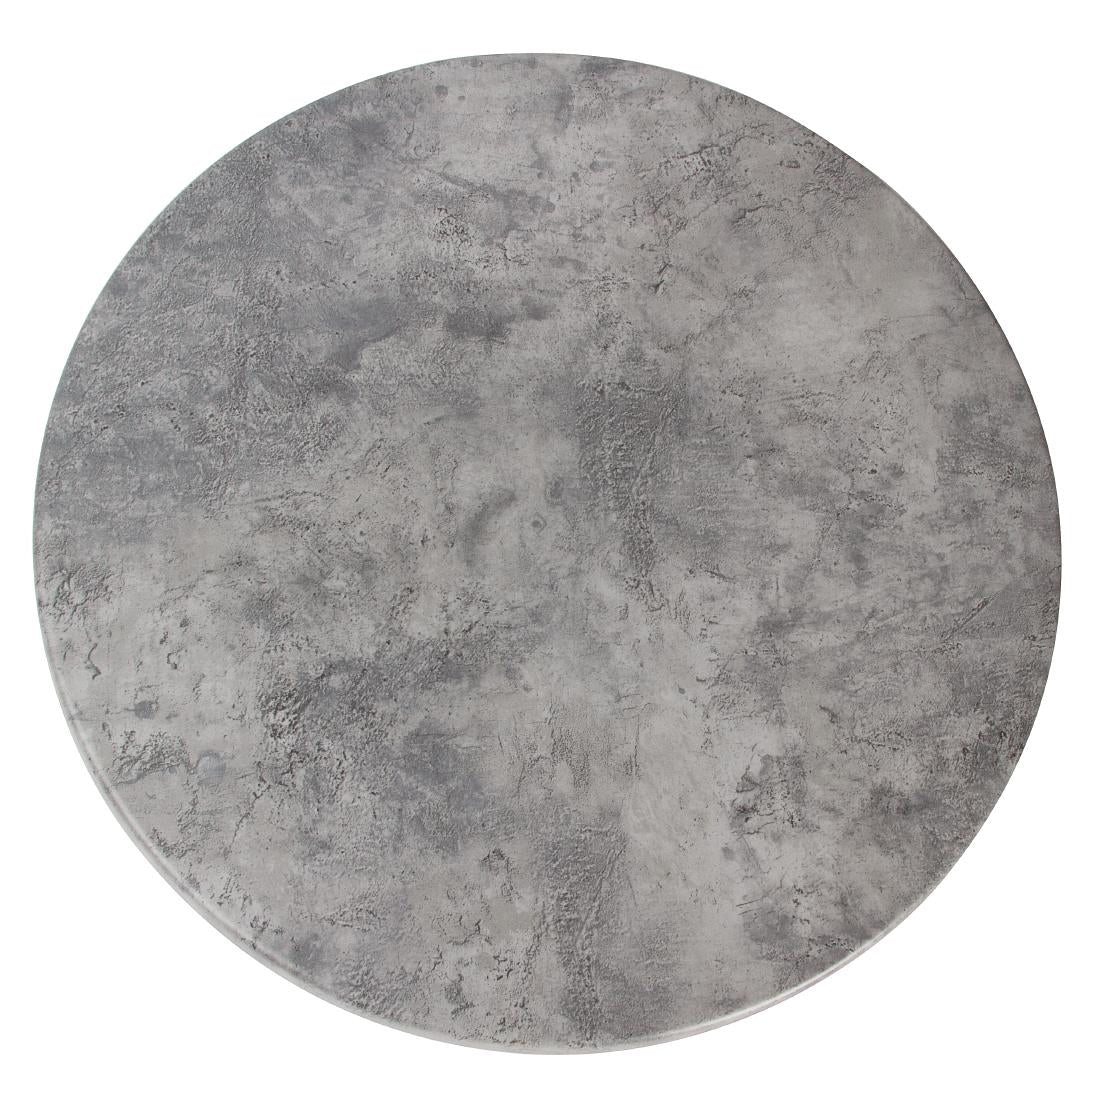 GM420 Werzalit Pre-Drilled Round Table Top Concrete 600mm JD Catering Equipment Solutions Ltd